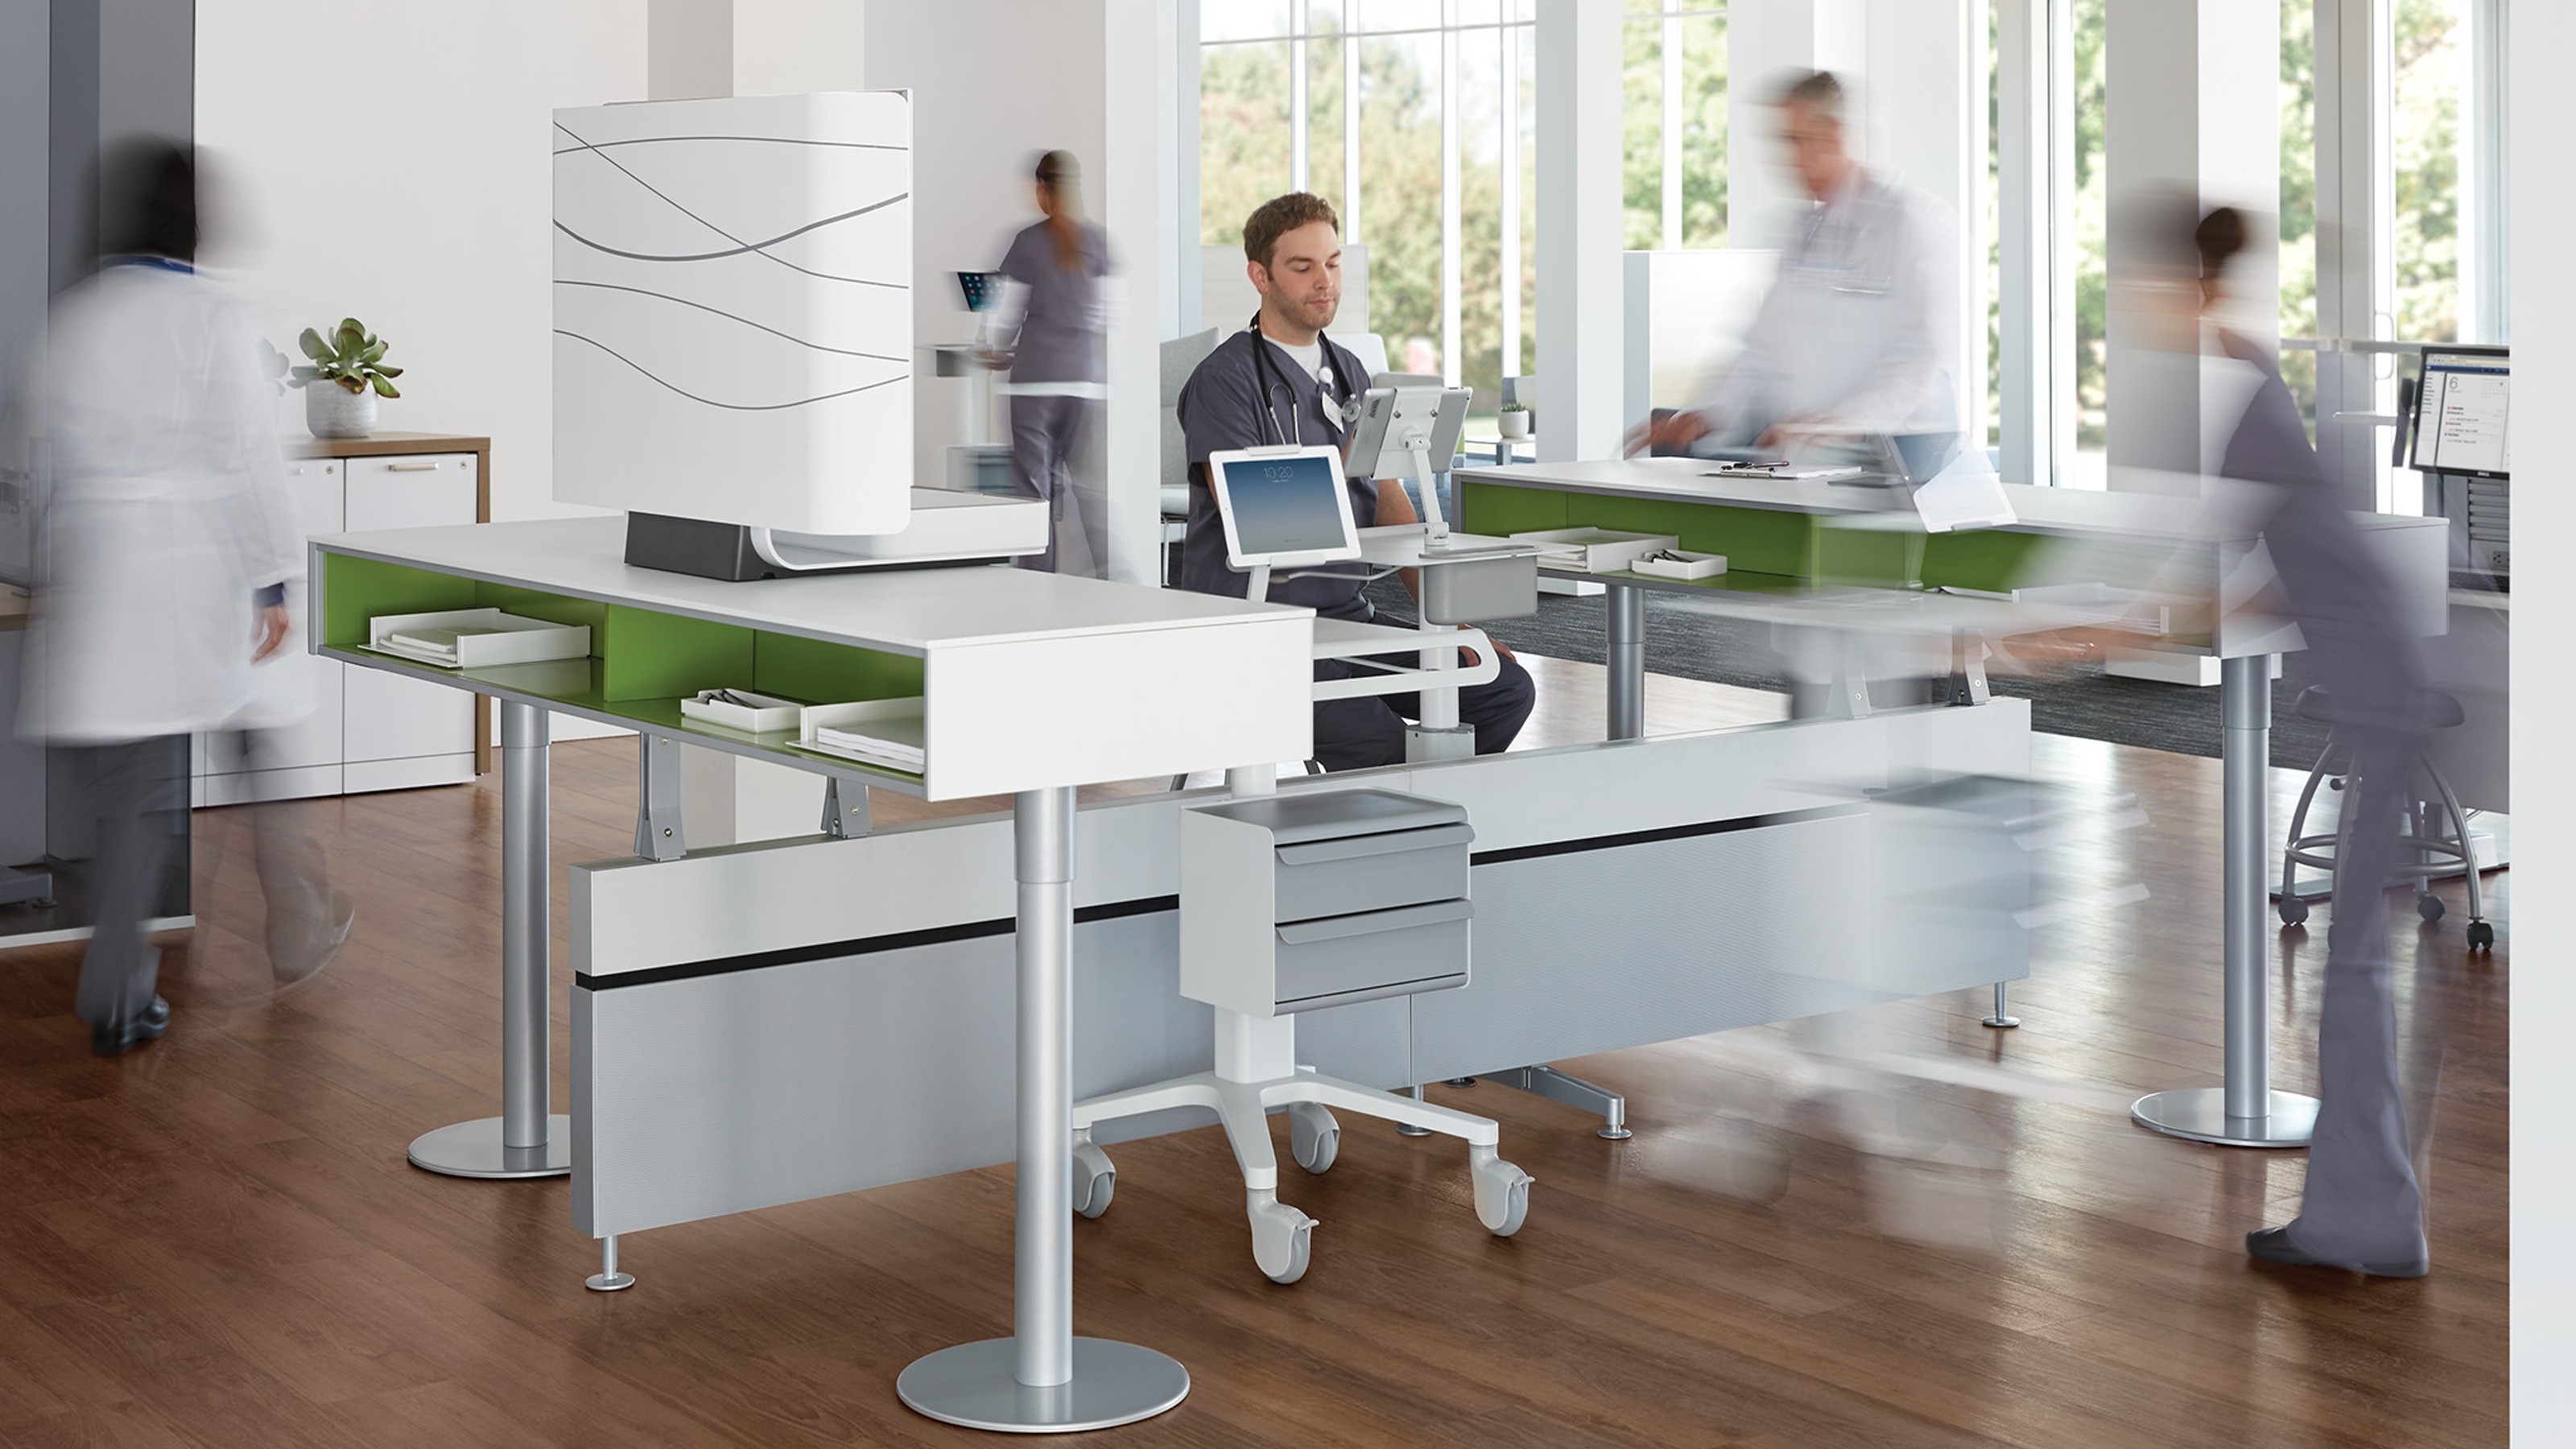 Healthcare Design Medical Worker Privacy Steelcase